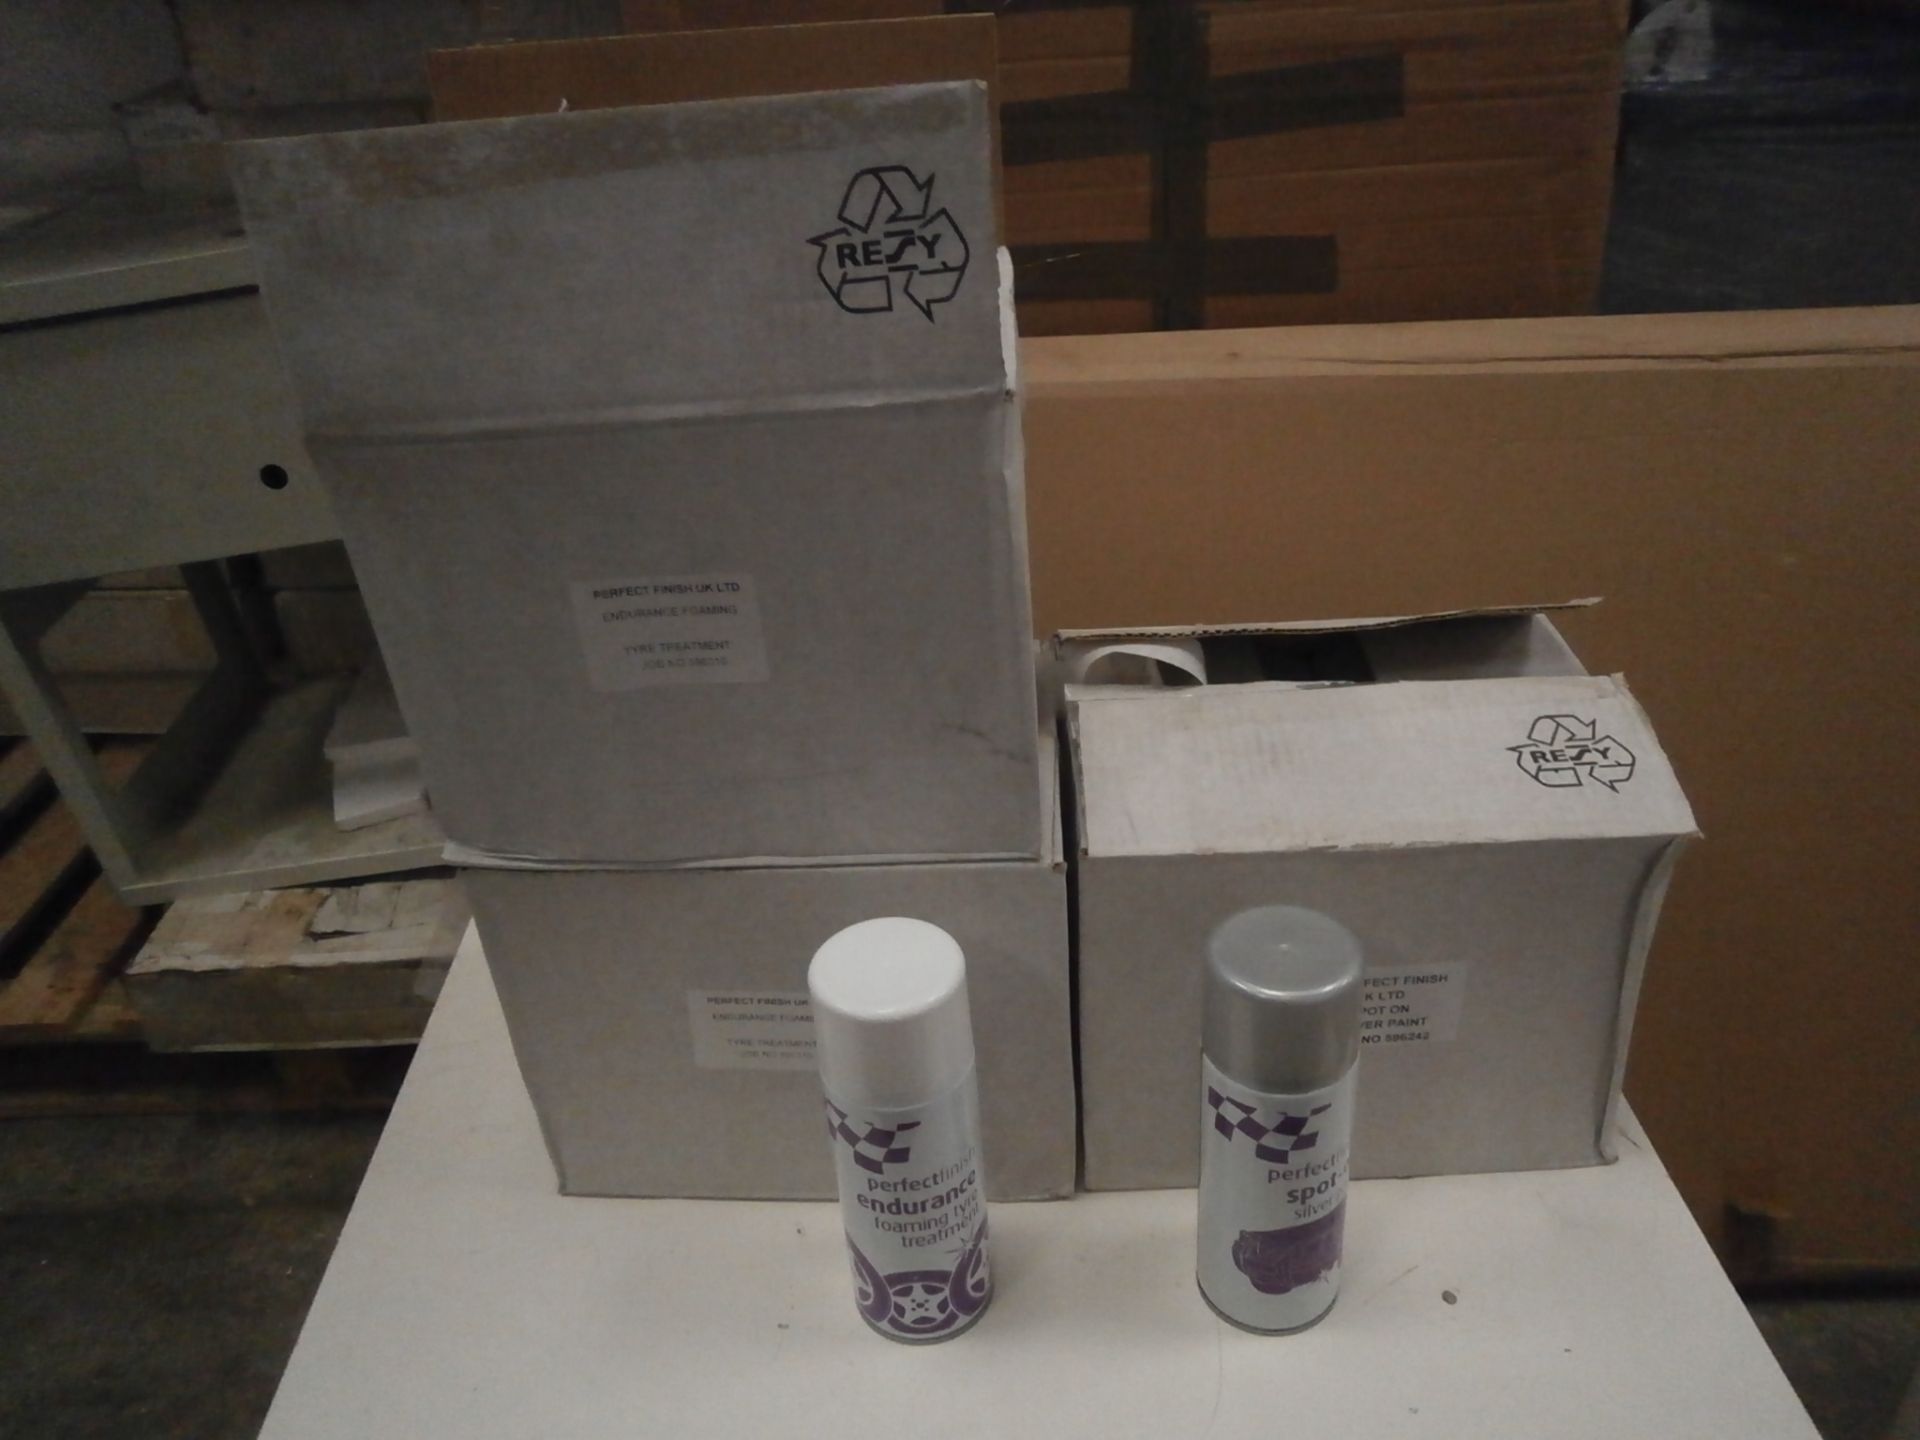 2 Boxes PerfectFinish Endurance Foaming Tyre Treatment 12 and 1 box of Perfectfinish Spot On